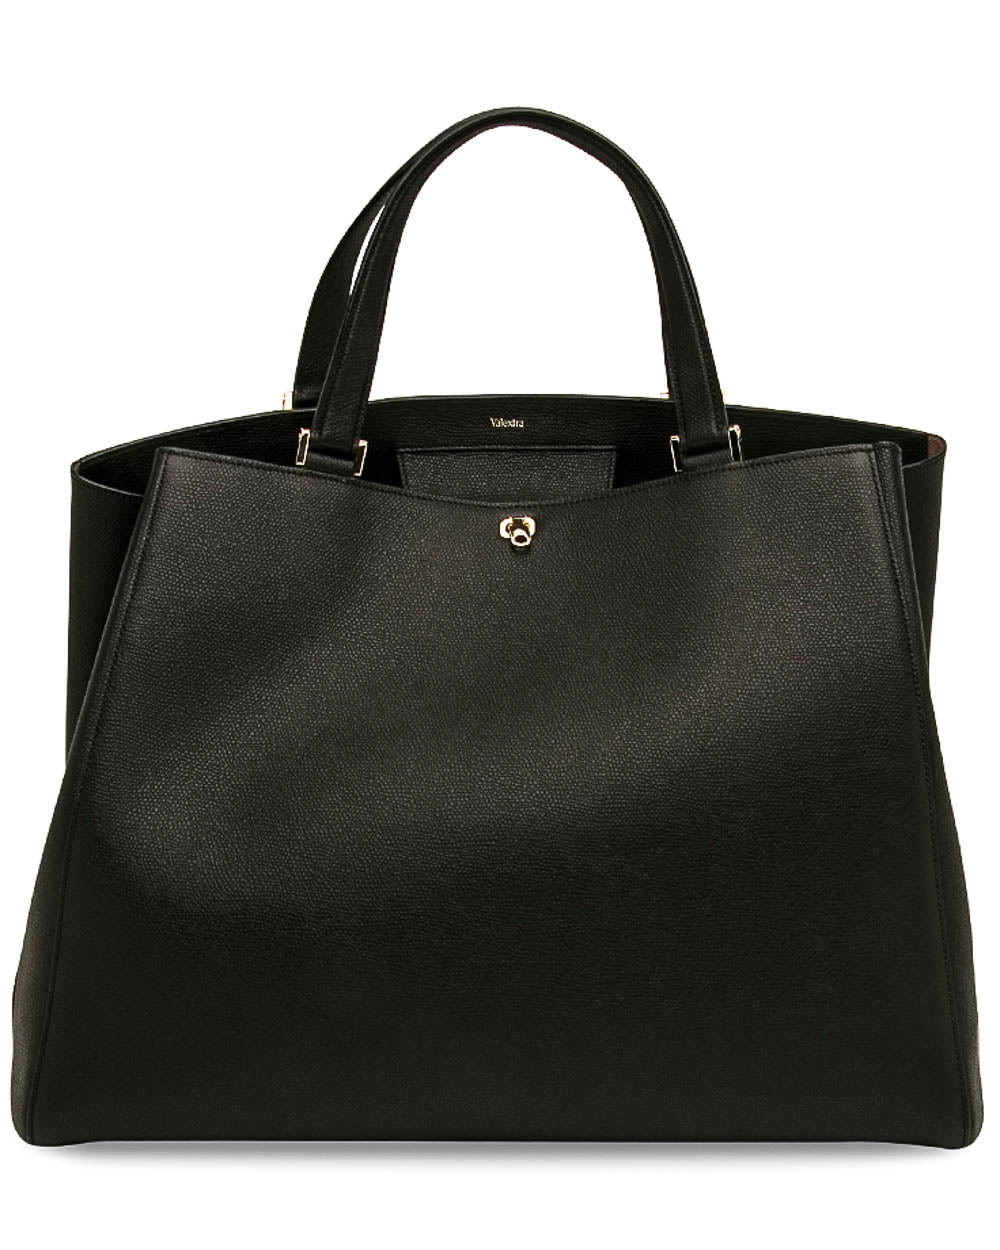 Valextra large Brera leather tote bag